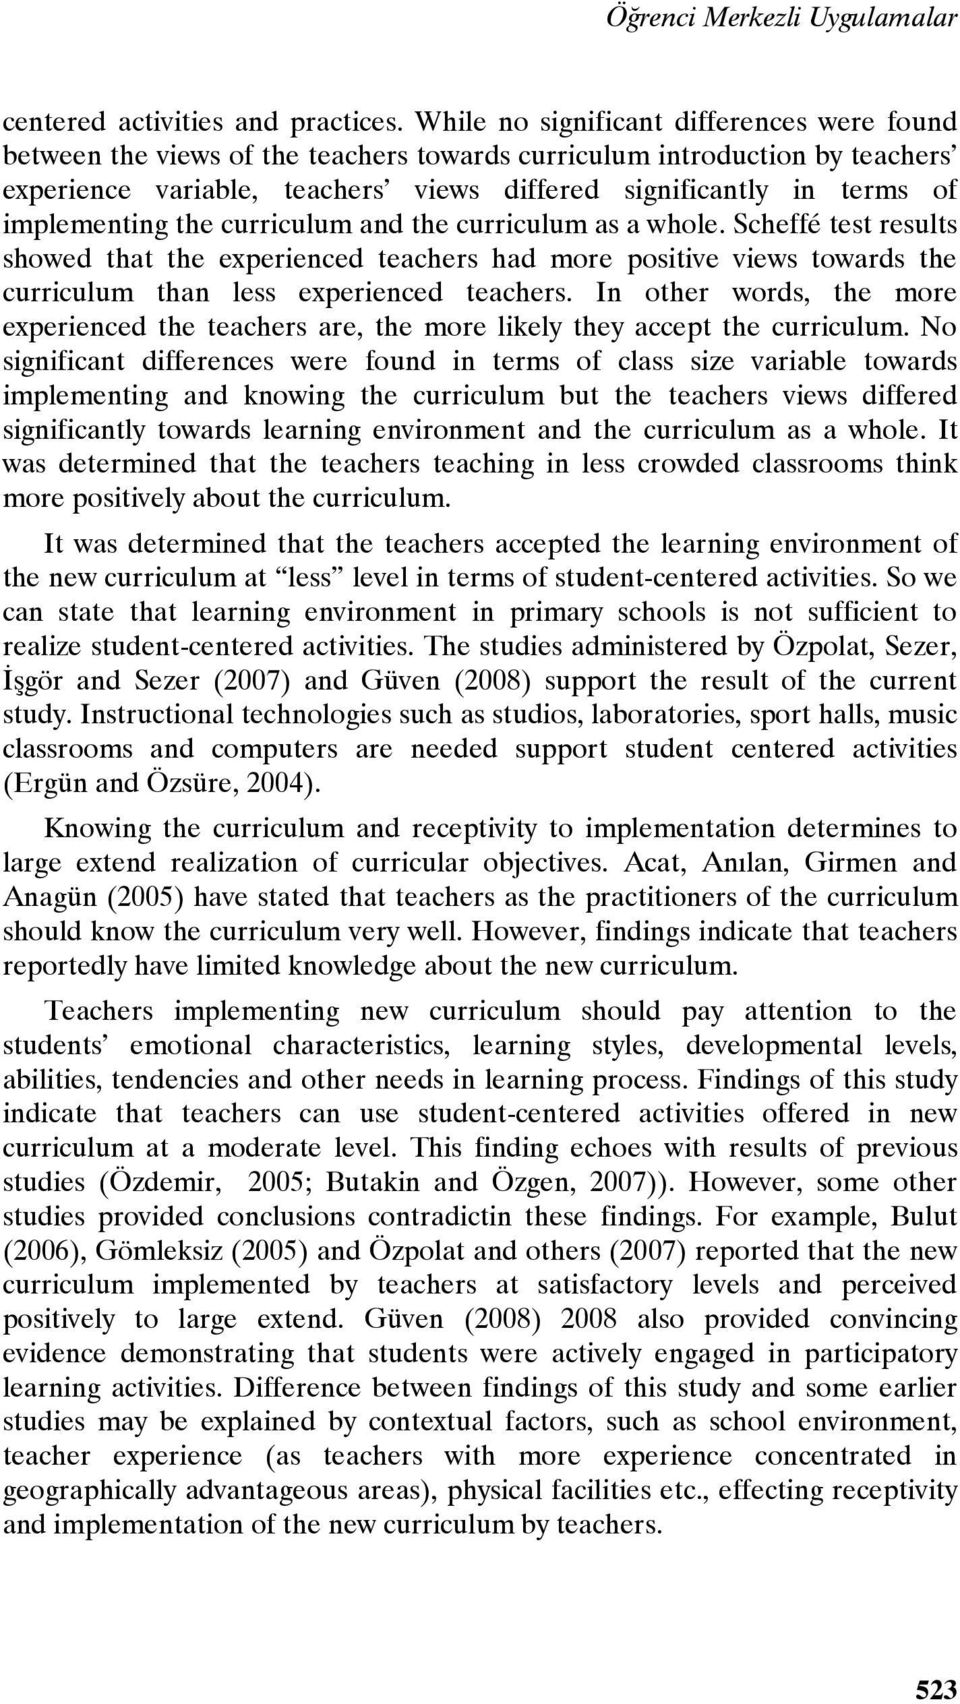 implementing the curriculum and the curriculum as a whole. Scheffé test results showed that the experienced teachers had more positive views towards the curriculum than less experienced teachers.